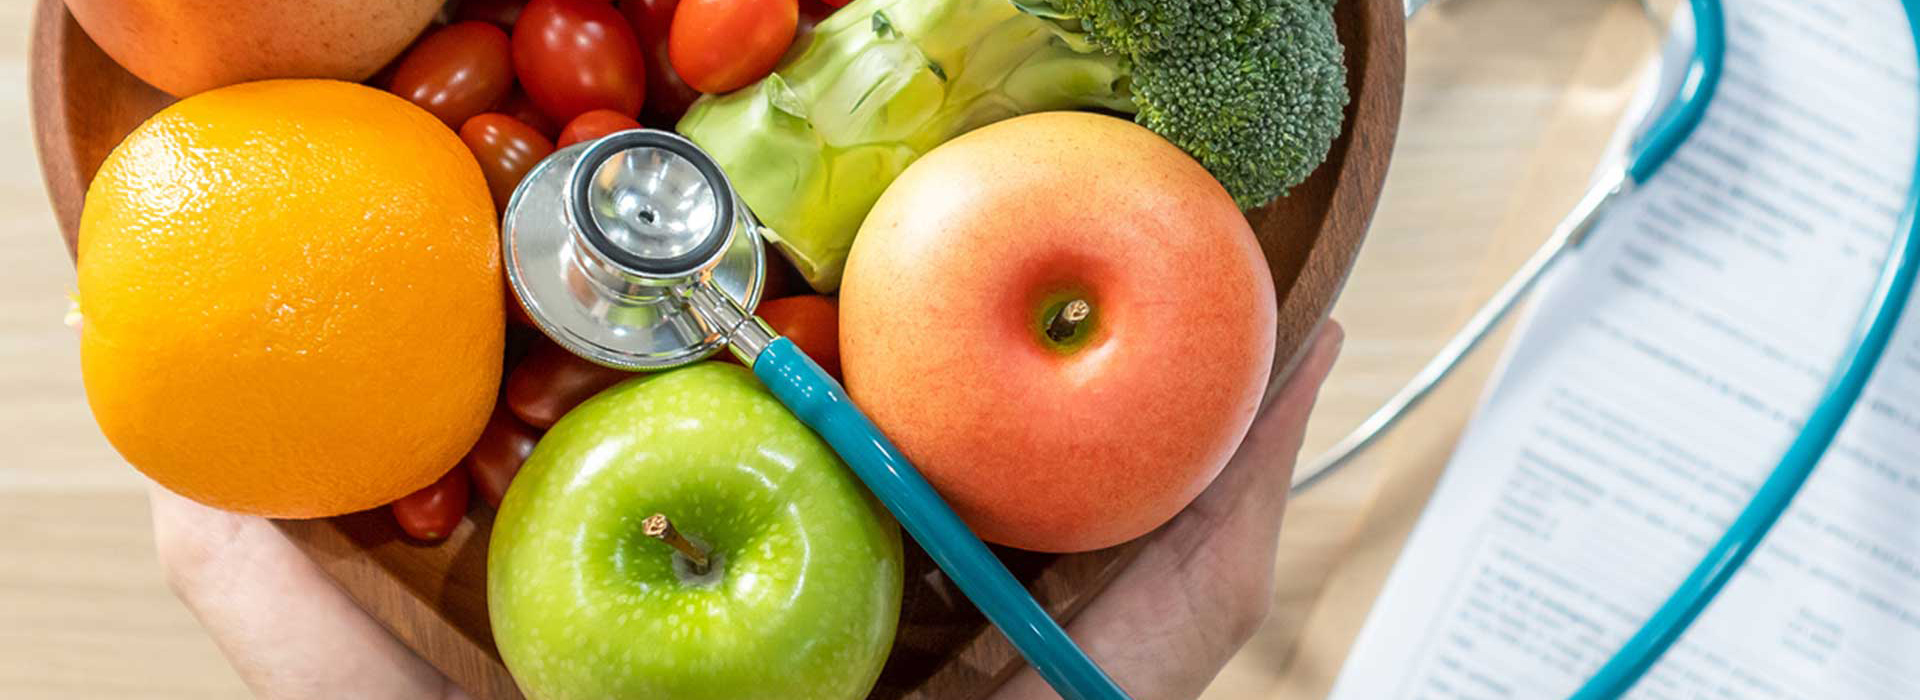 Stethoscope in bowl of fruit and vegetables